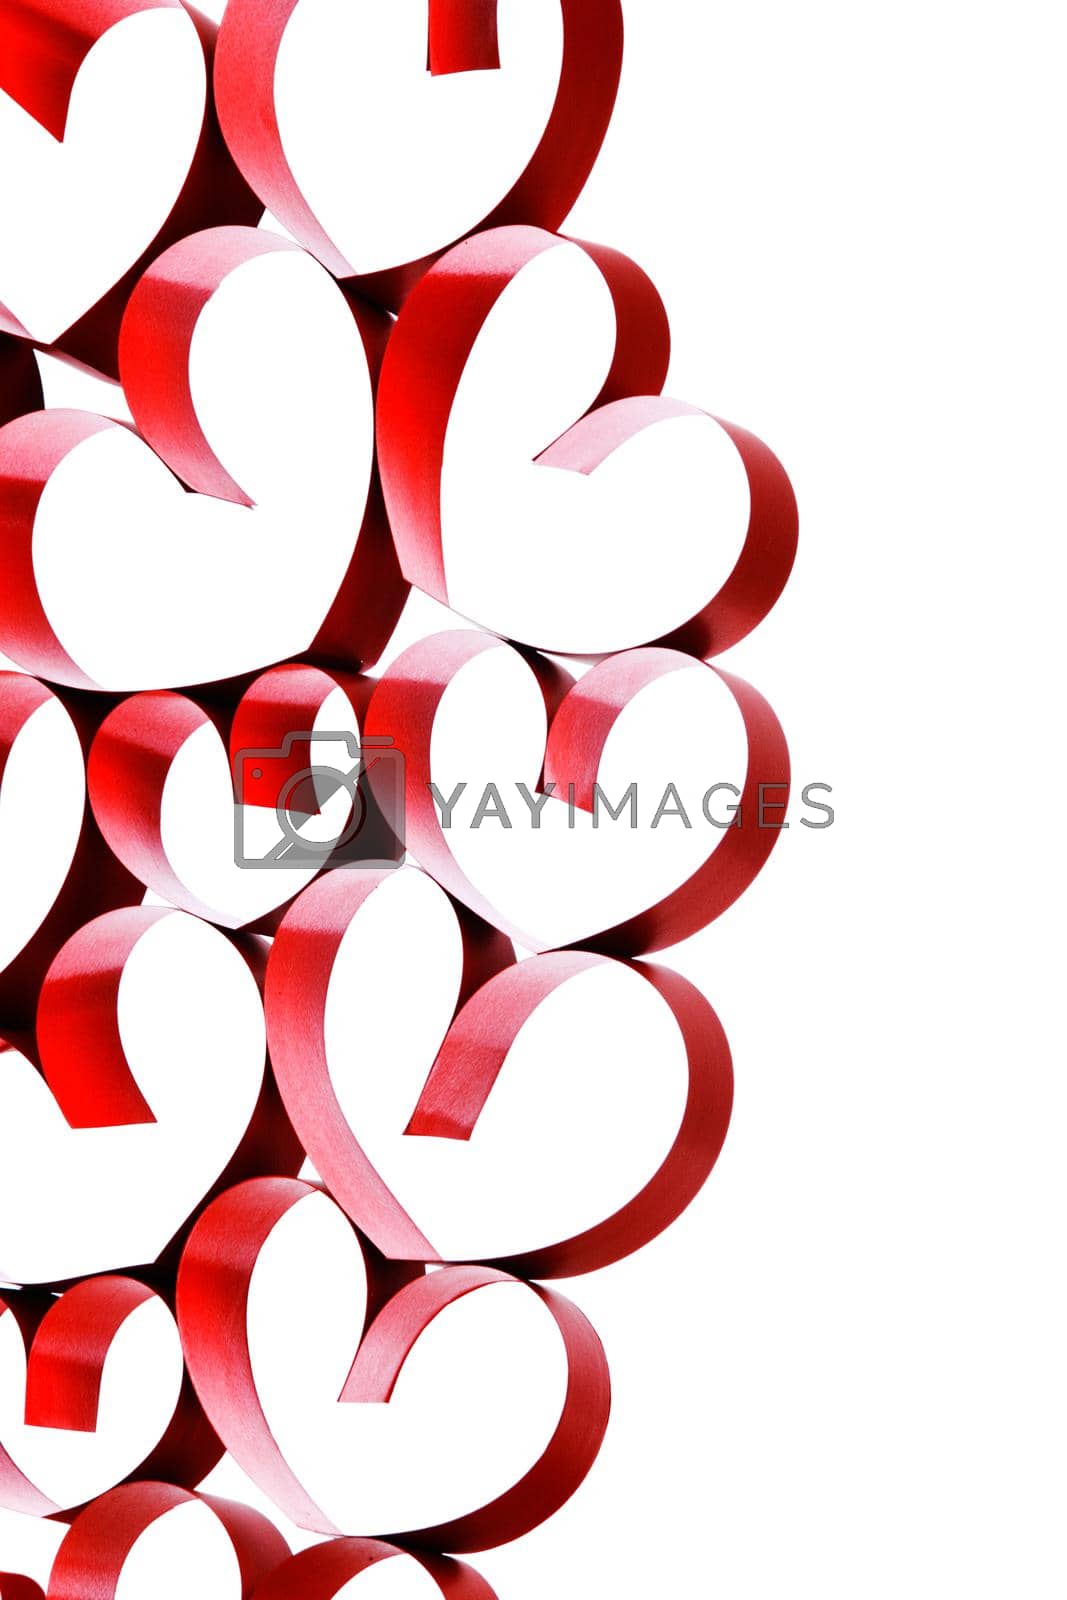 Royalty free image of Linked red ribbon hearts on white by Yellowj